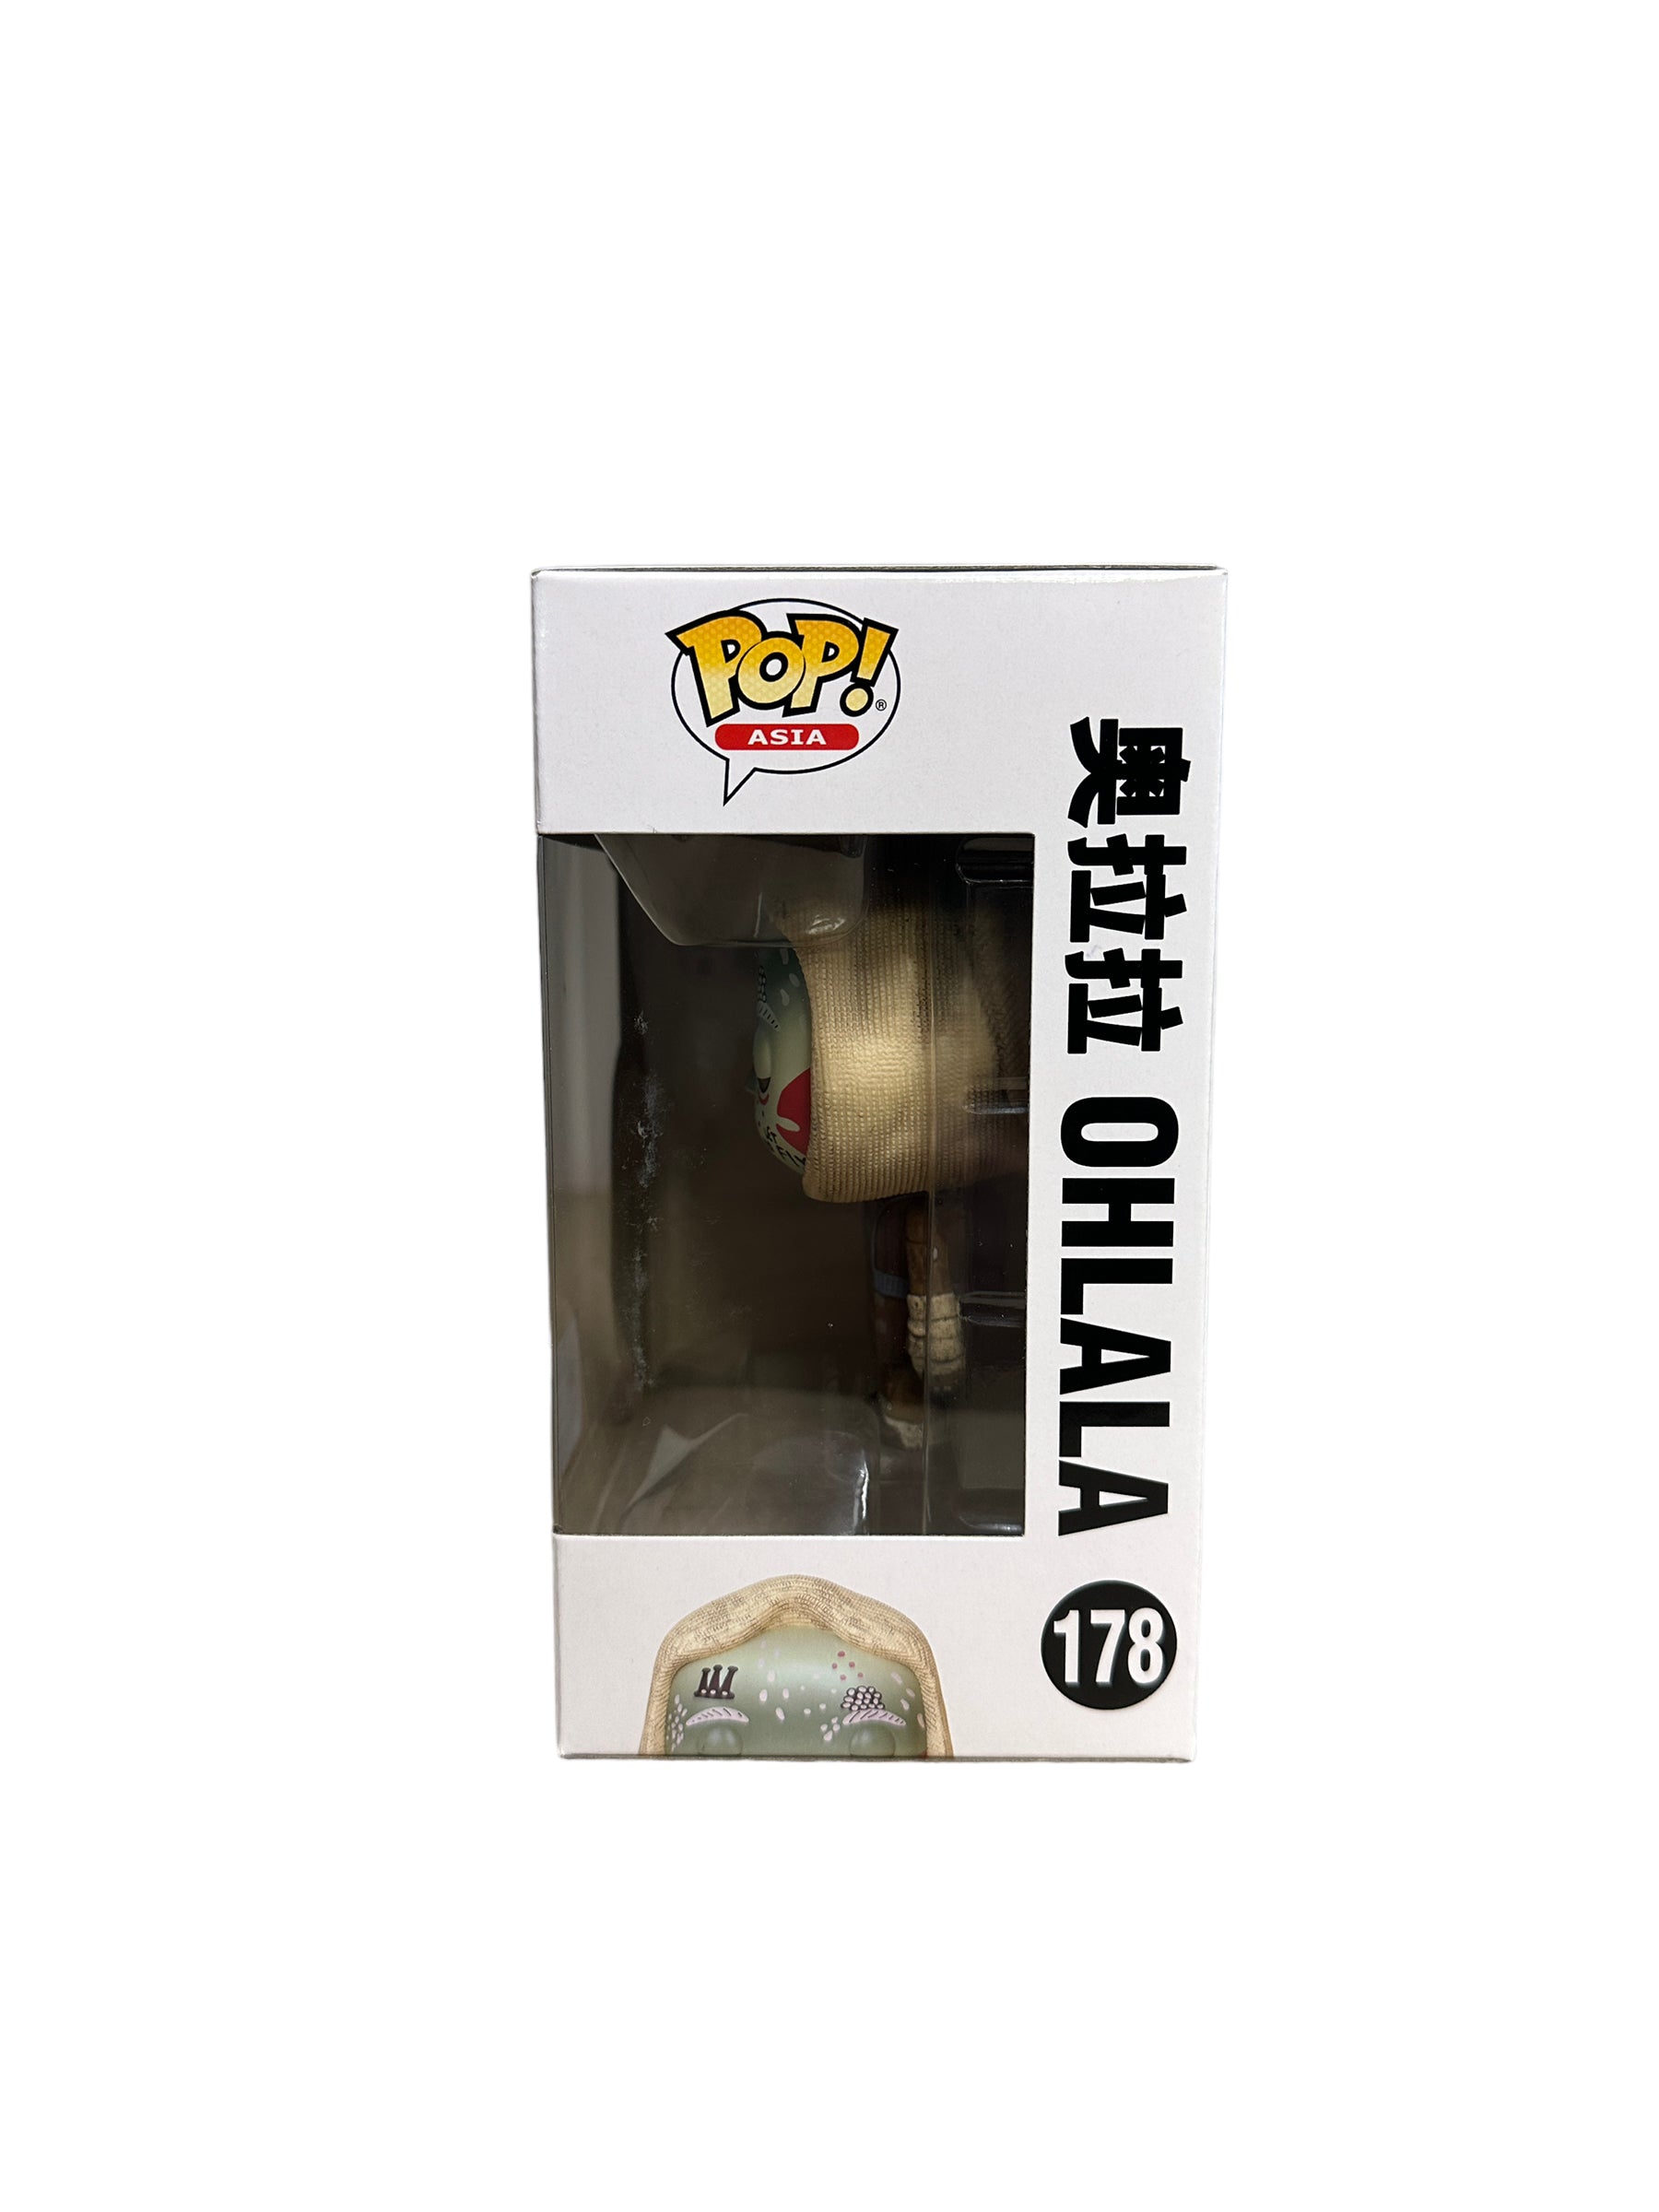 Ohlala #178 Funko Pop! - Reen Barrera - SDCC 2023 Official Convention Exclusive - Condition 9/10